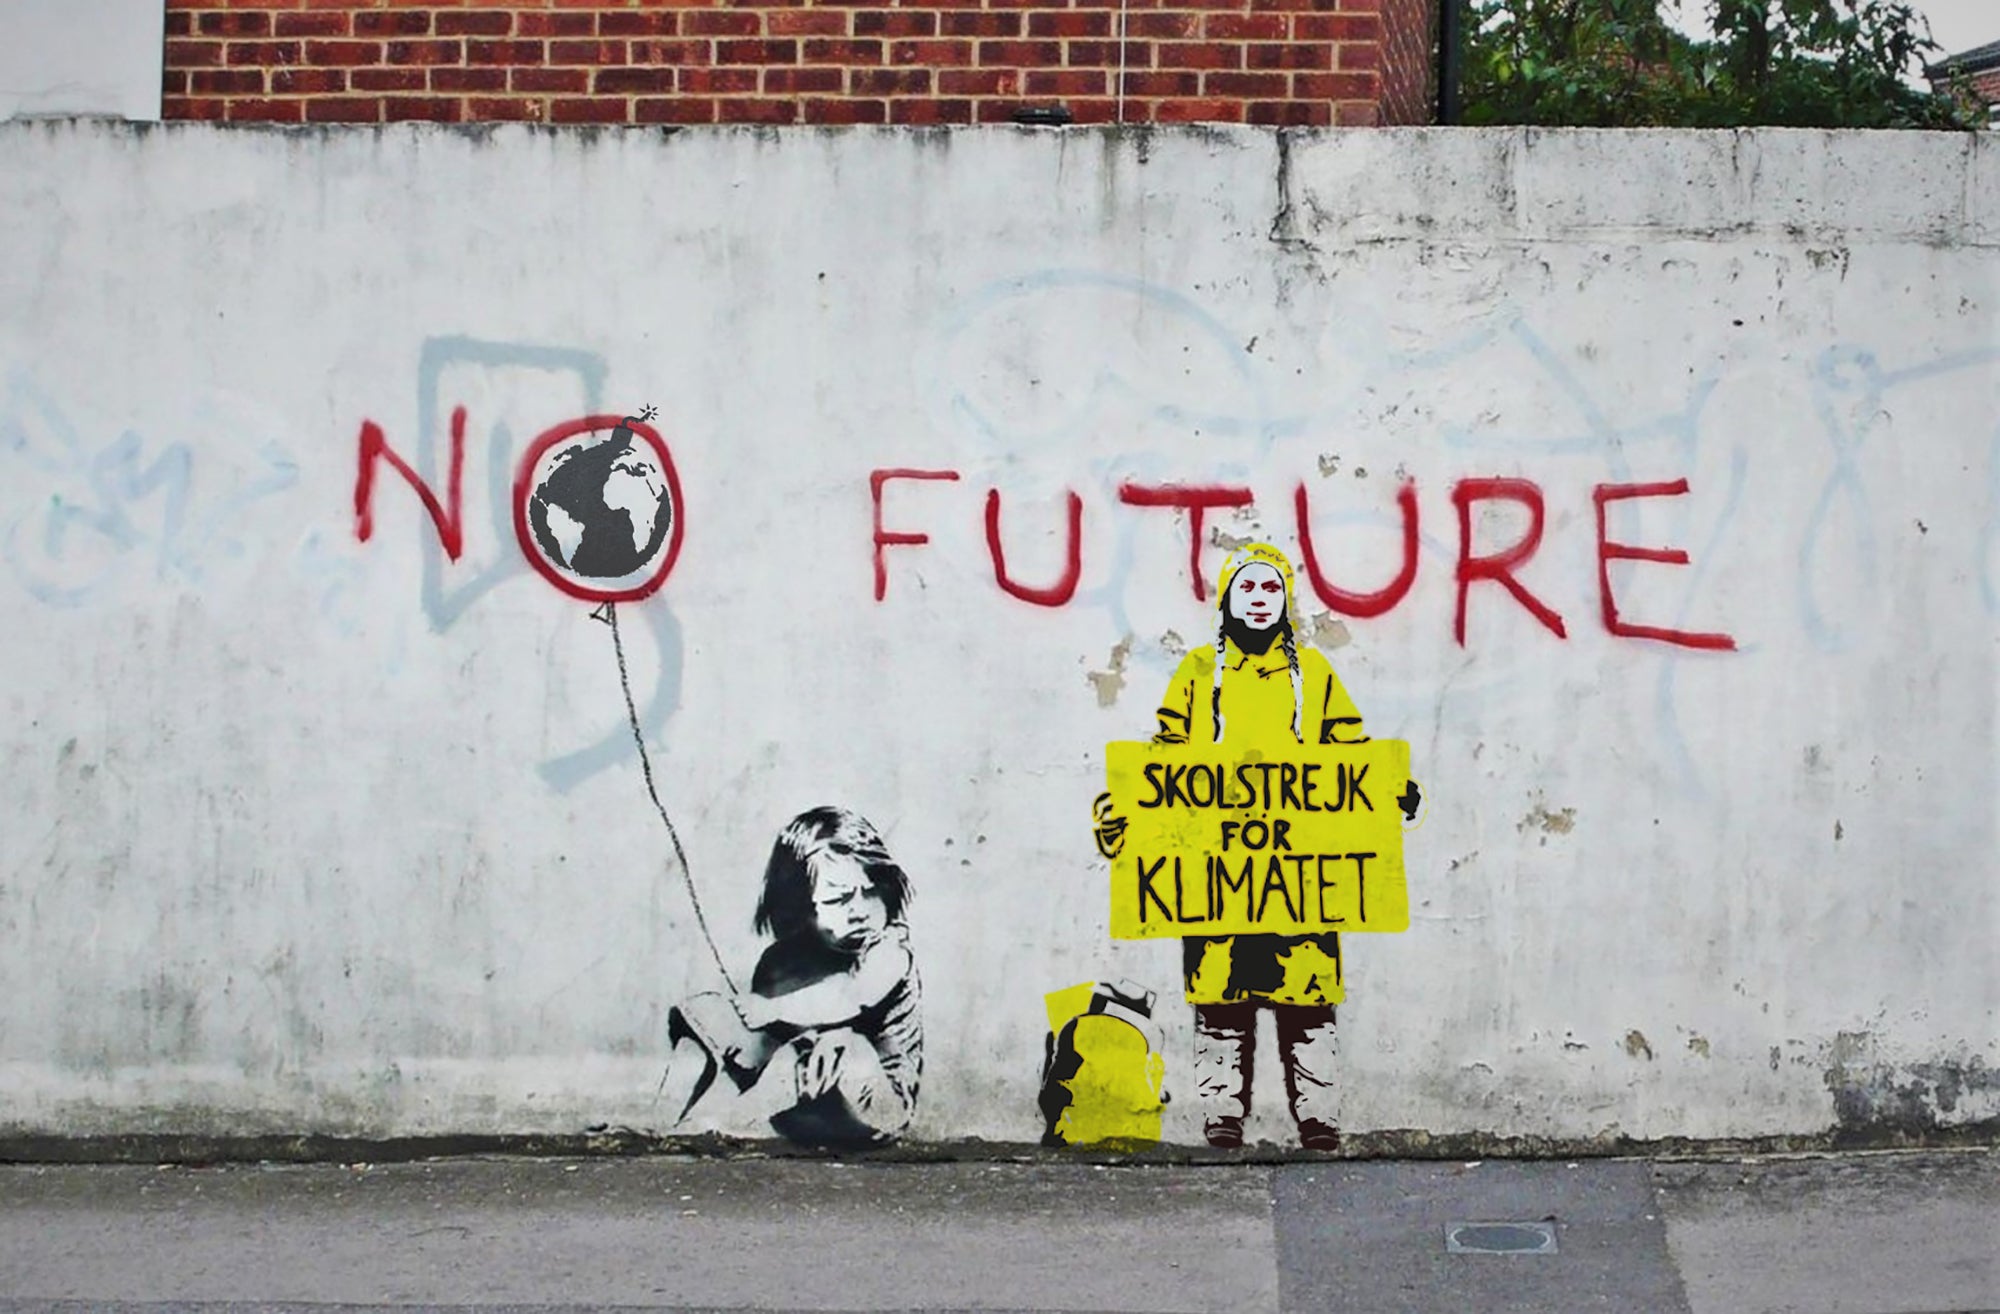 Free spray paint stencils of climate activist Greta -I´d be in school if you did your